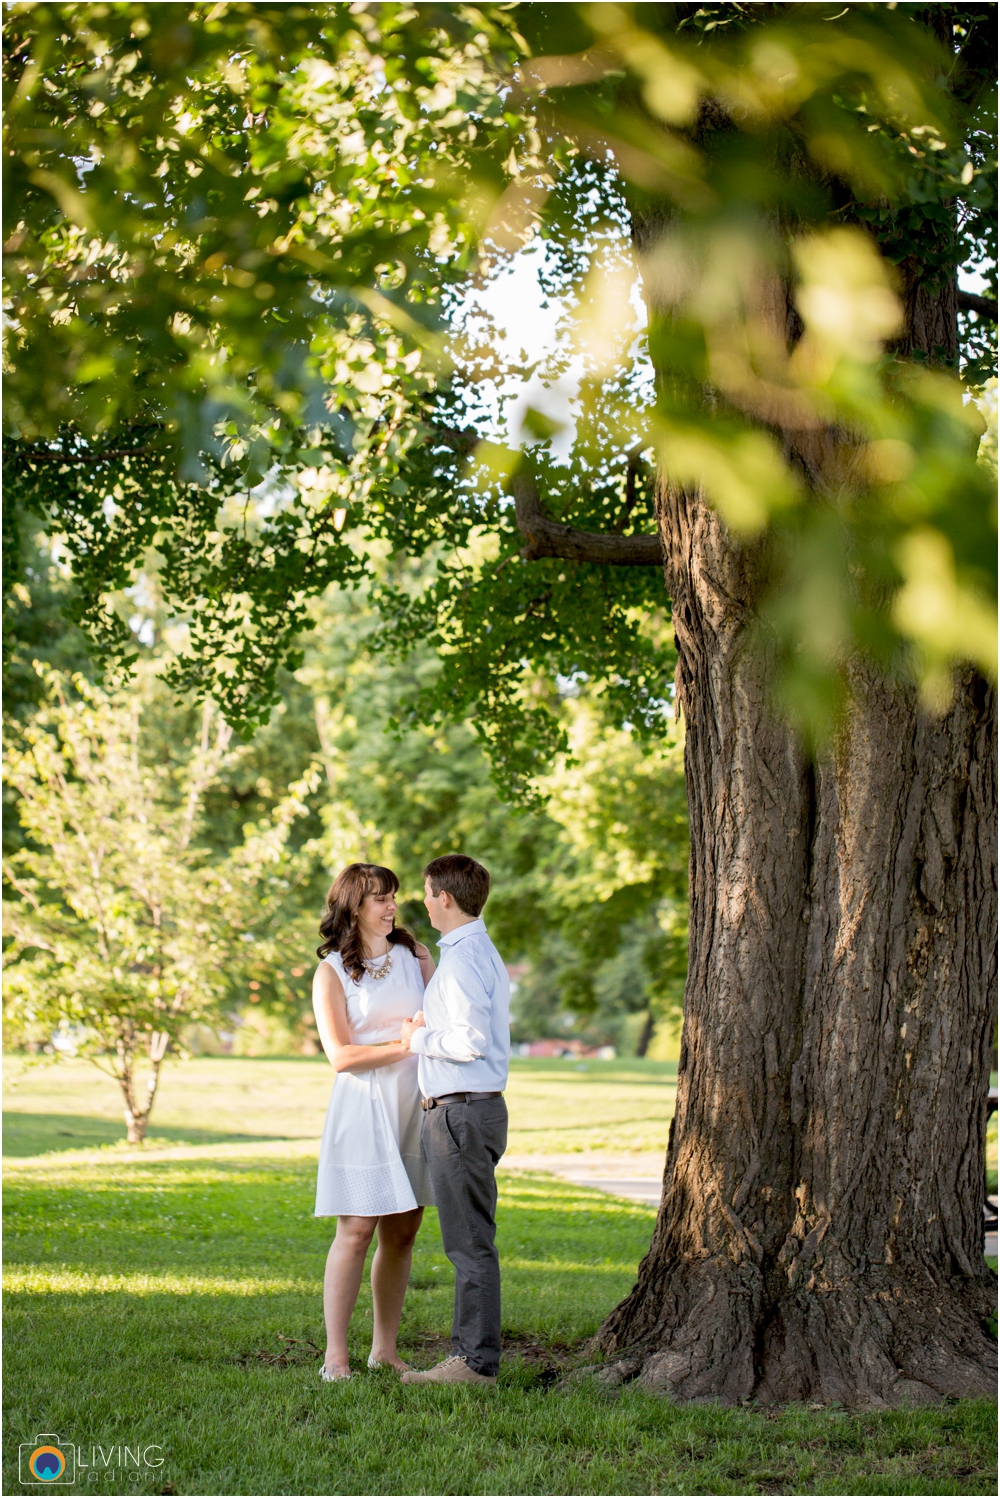 eva-dave-engaged-patterson-park-baltimore-downtown-living-radiant-photography-photos_0018.jpg